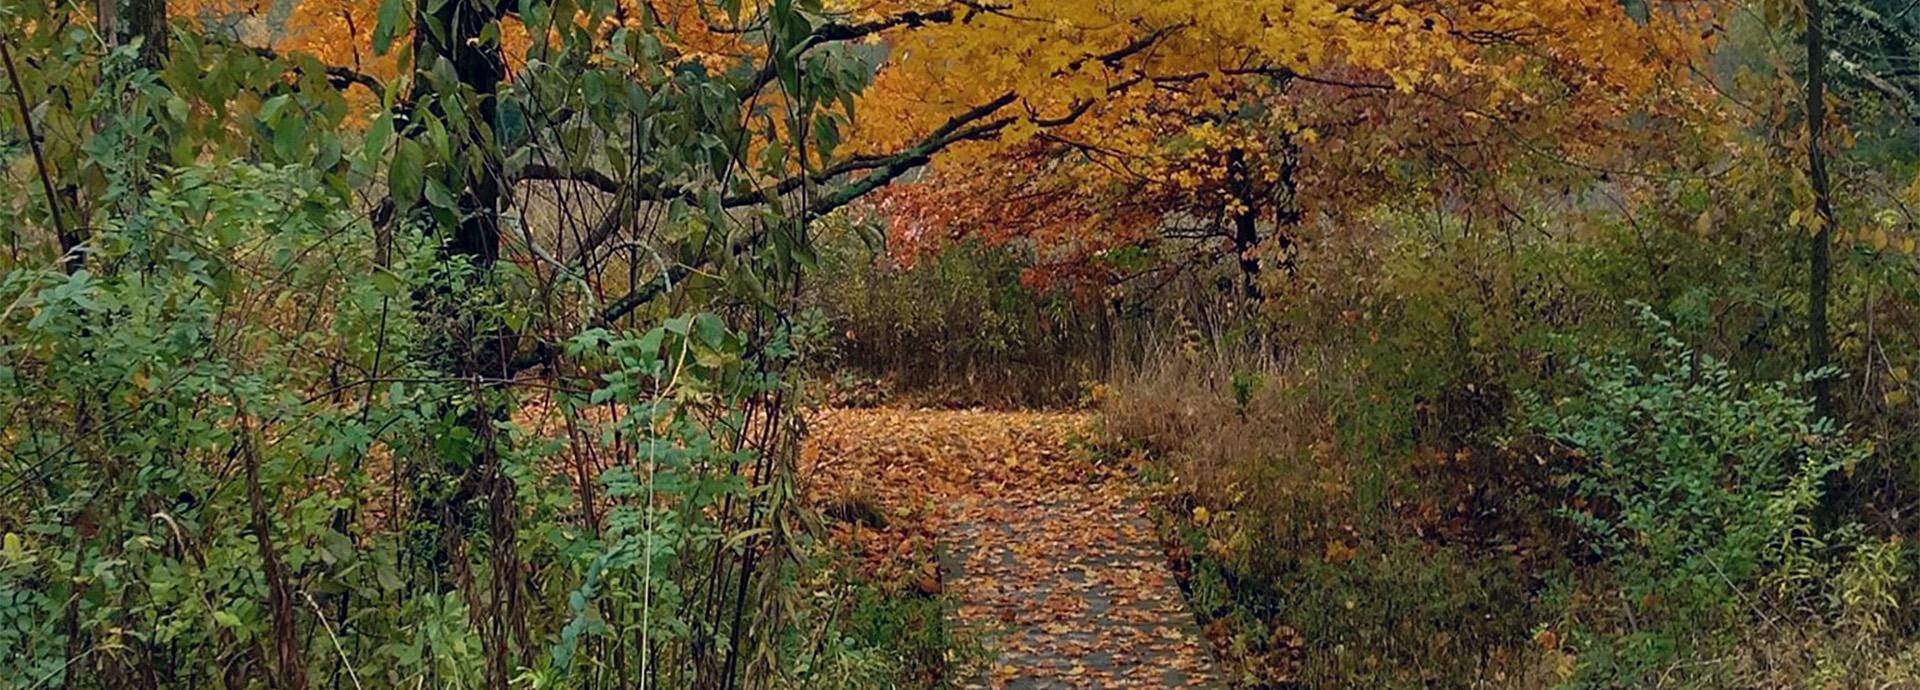 Slideshow Image - A path cut through thick underbrush and coated in bright fall leaves